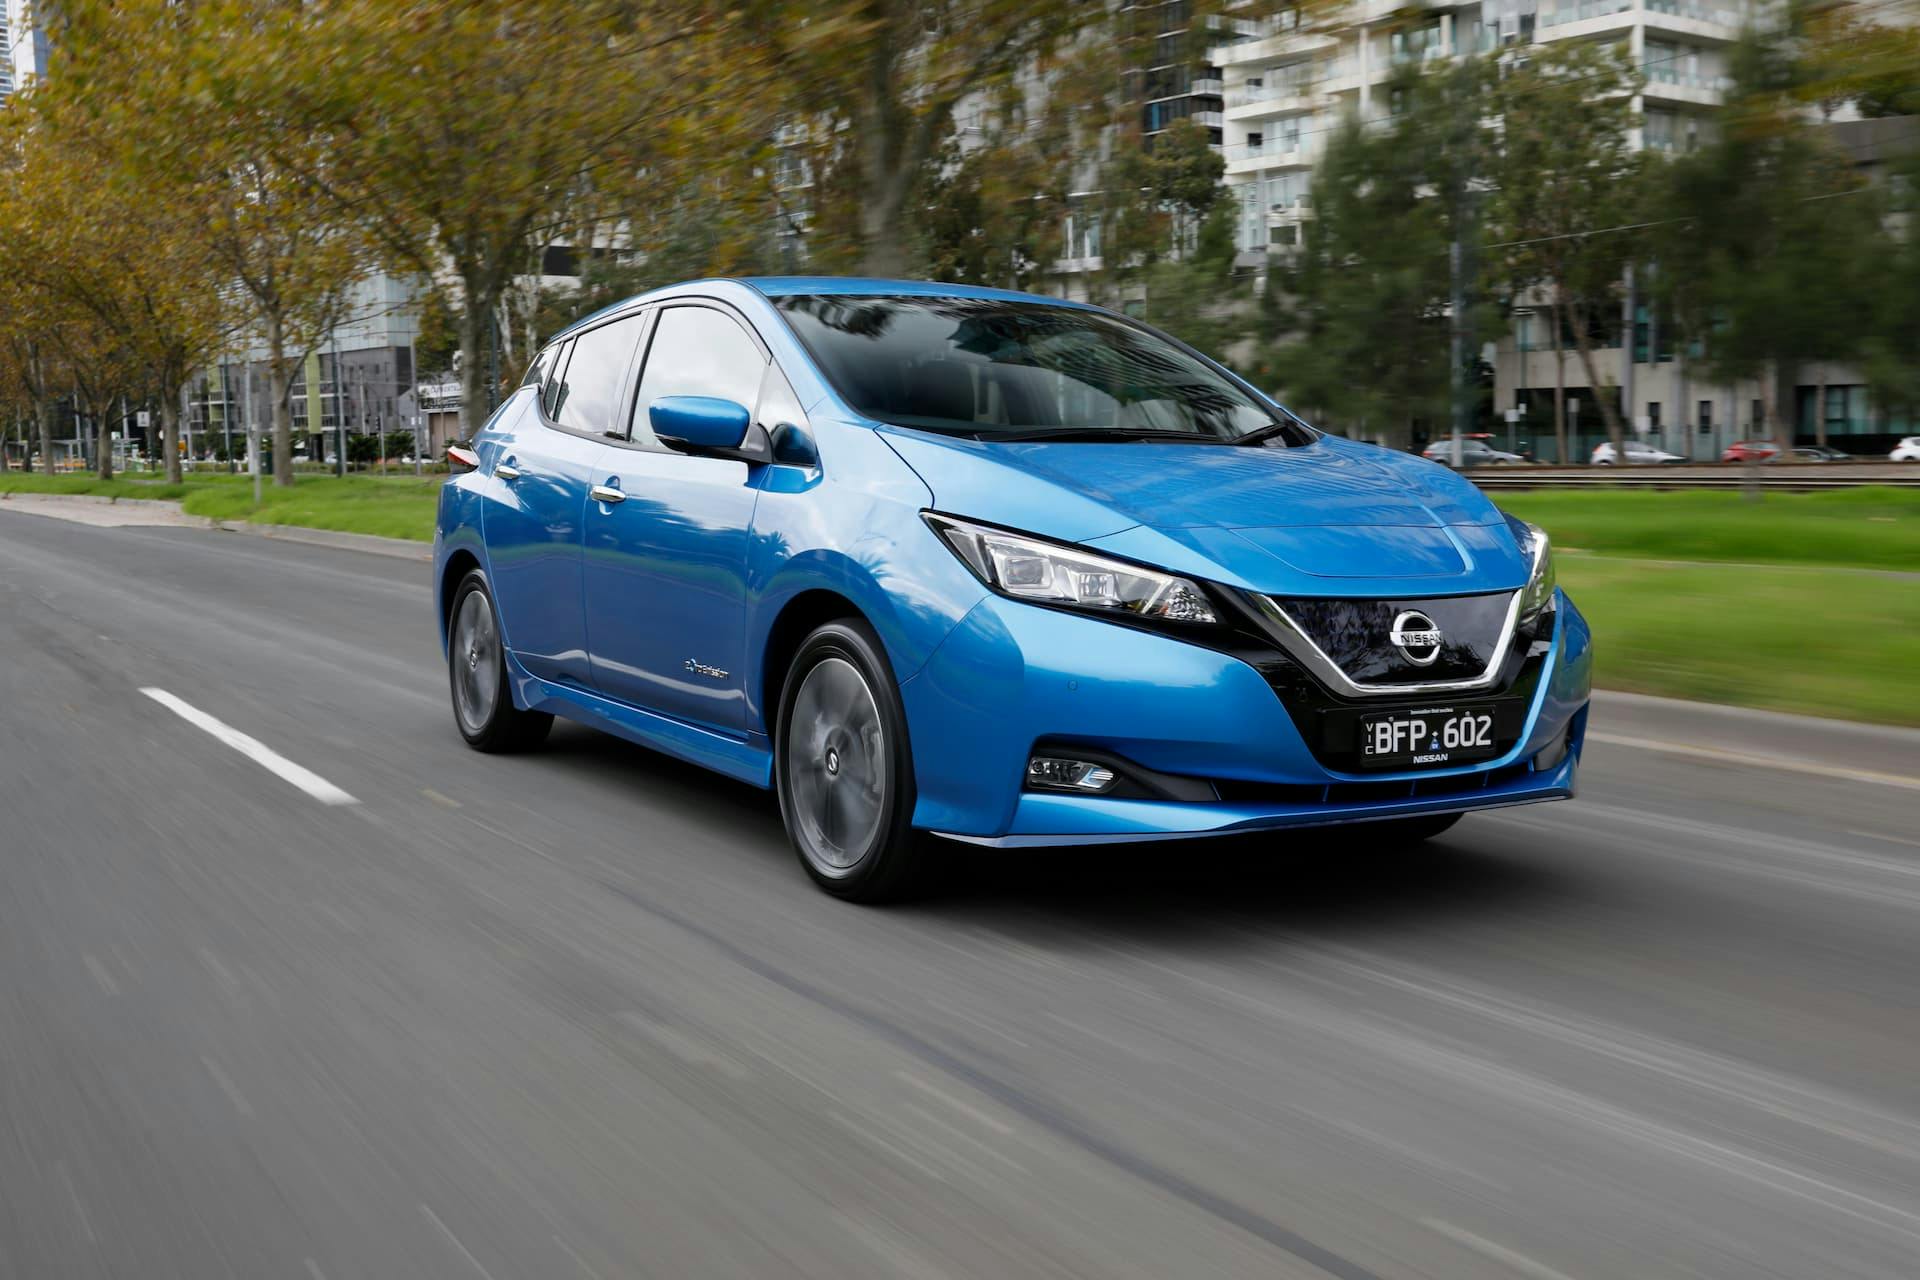 Blue Nissan Leaf e+ driving in city